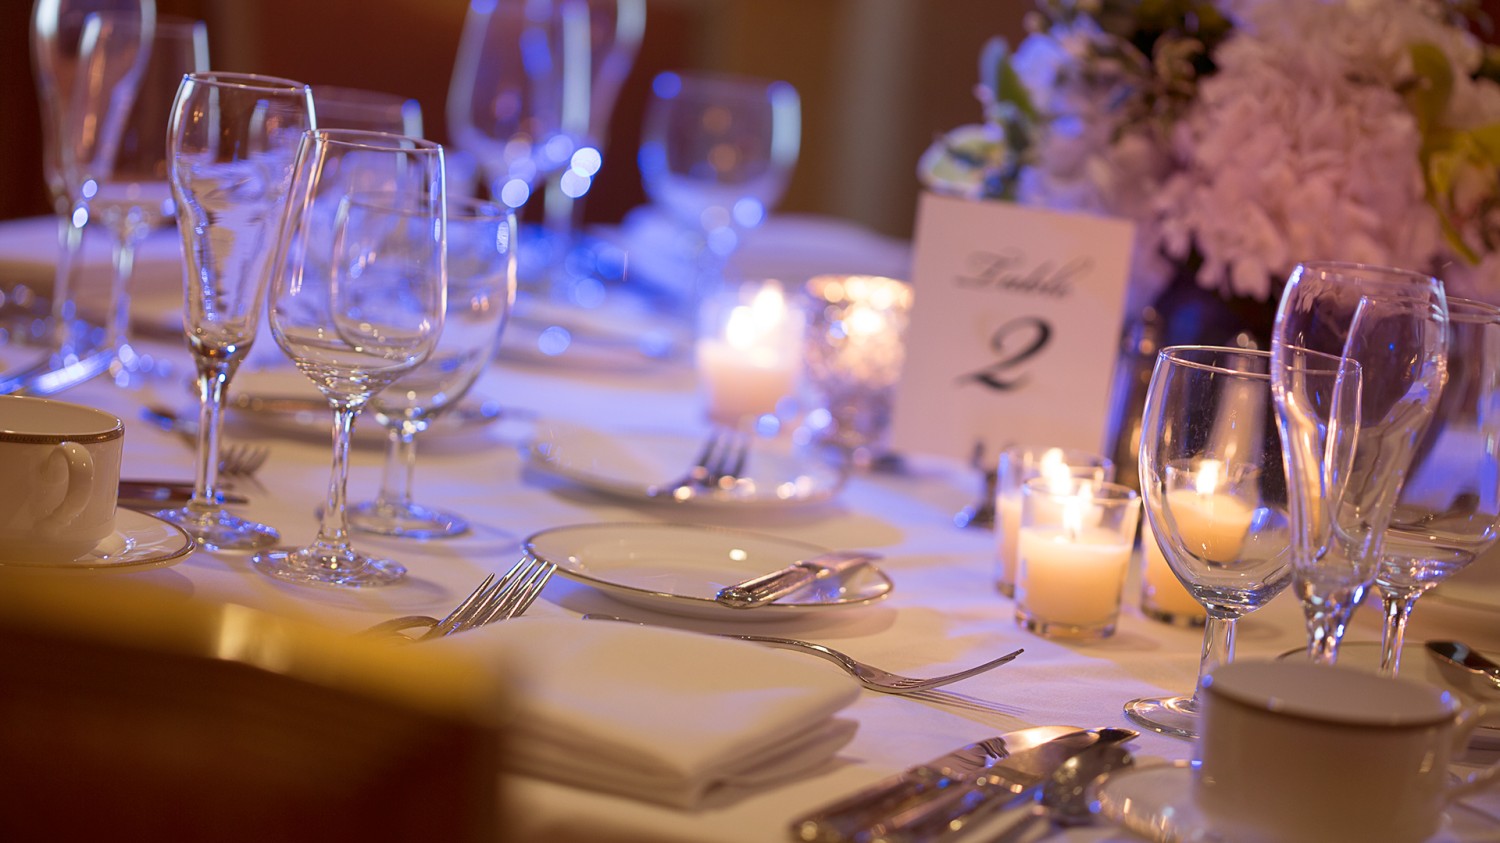 Amway Grand_Wedding_Set Up Detail Shot_Table Number_PLates_Napkins_Glasses_Silverware_Flowers_Candles